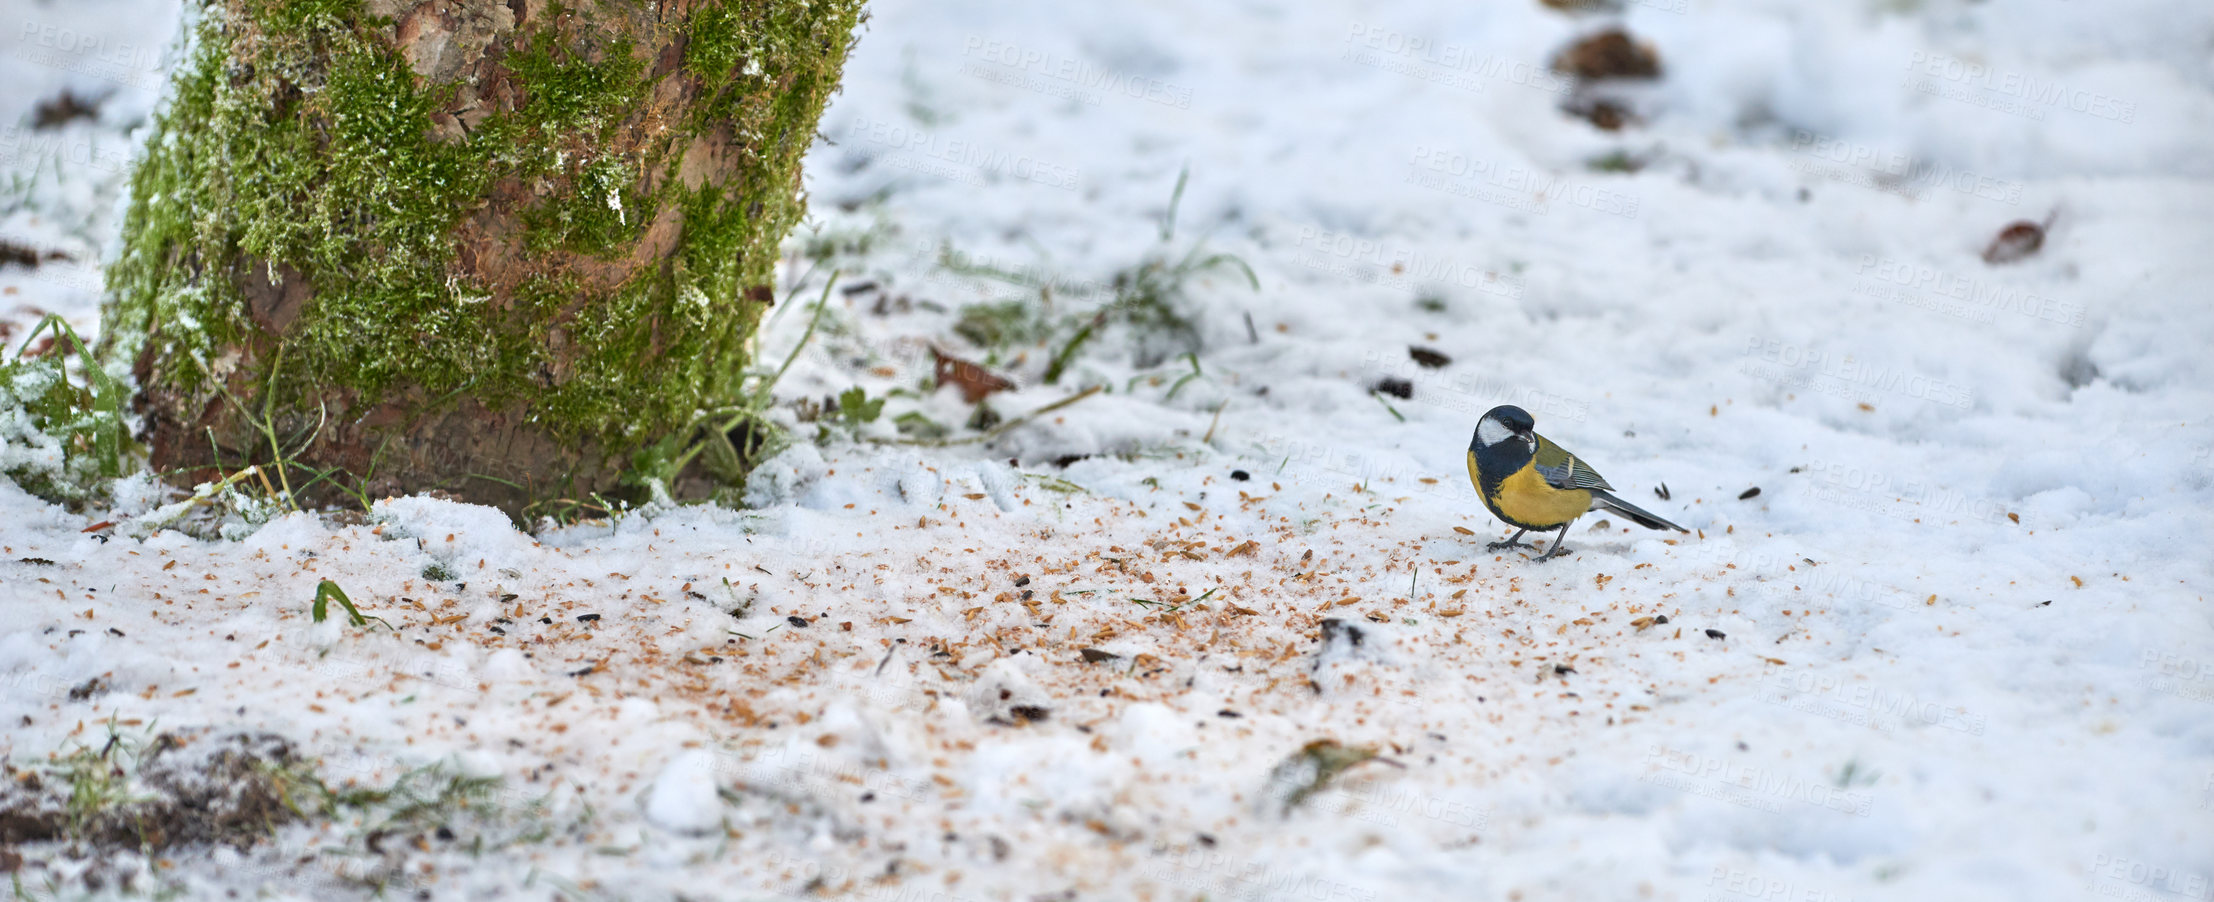 Buy stock photo Supporting and feeding bird life during the winter season as part of nature conservation and protection. Eurasian blue tit standing outside on the snow during an icy and cold morning after snow fall